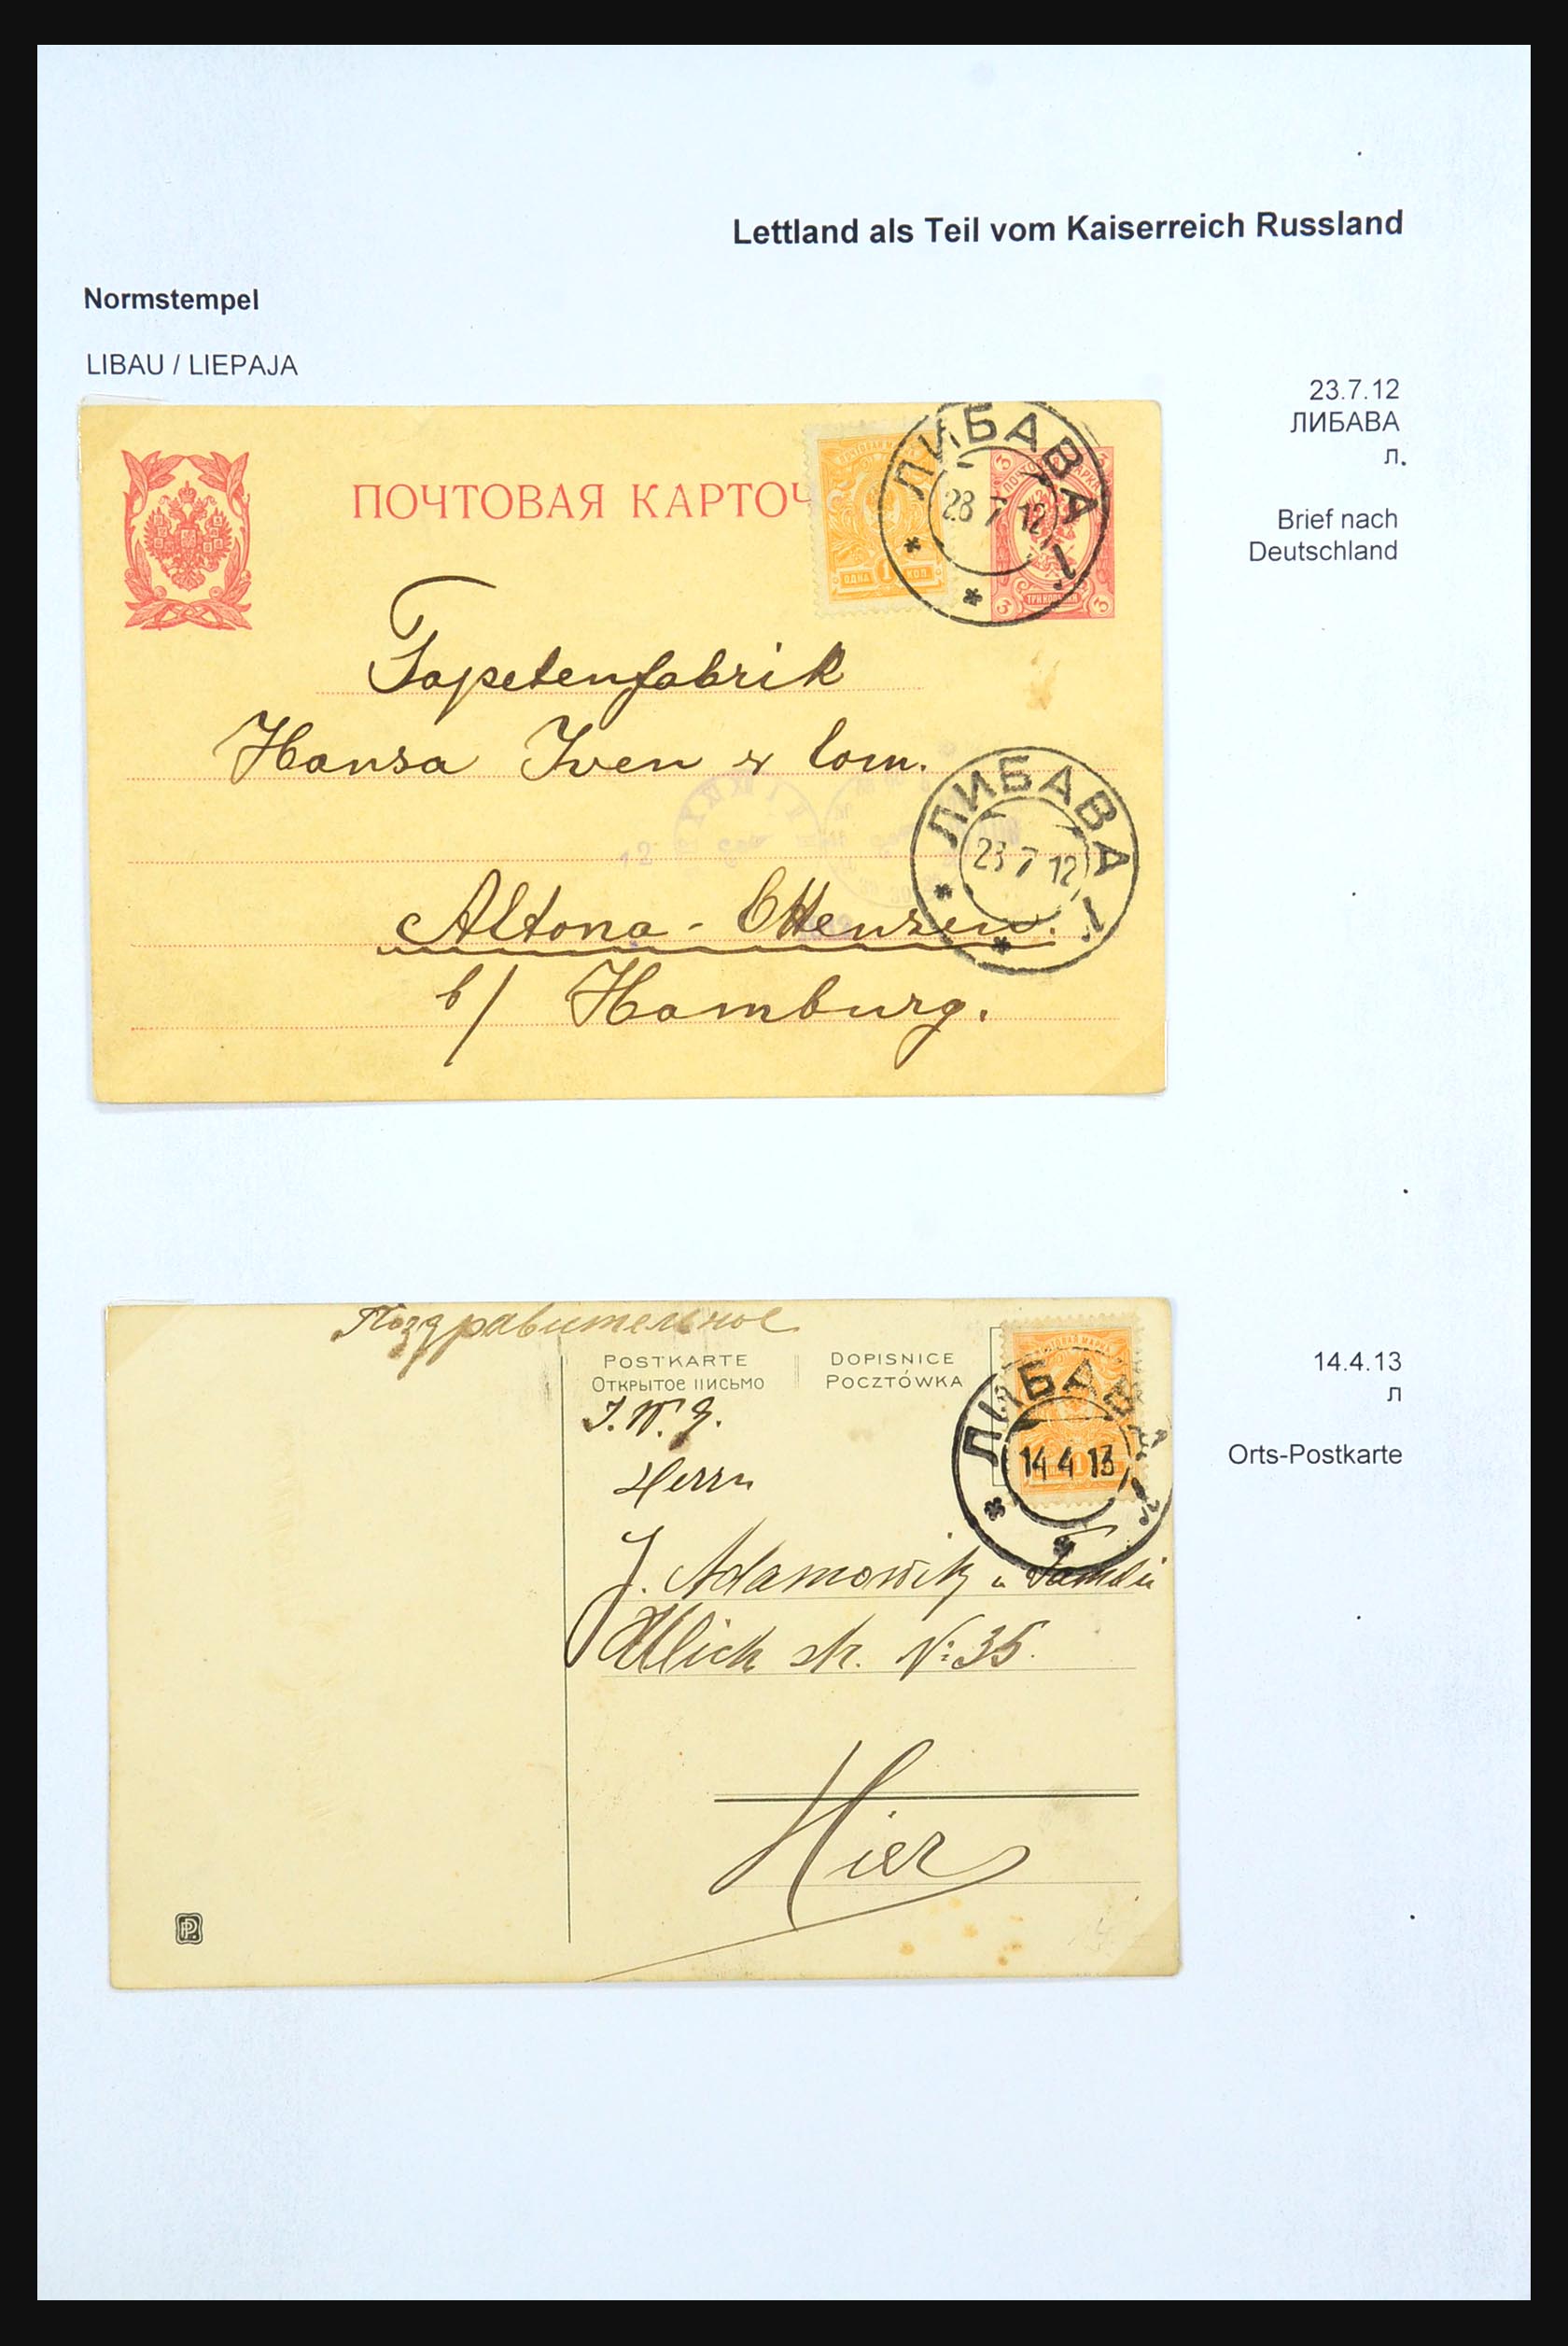 31305 057 - 31305 Latvia as part of Russia 1817-1918.